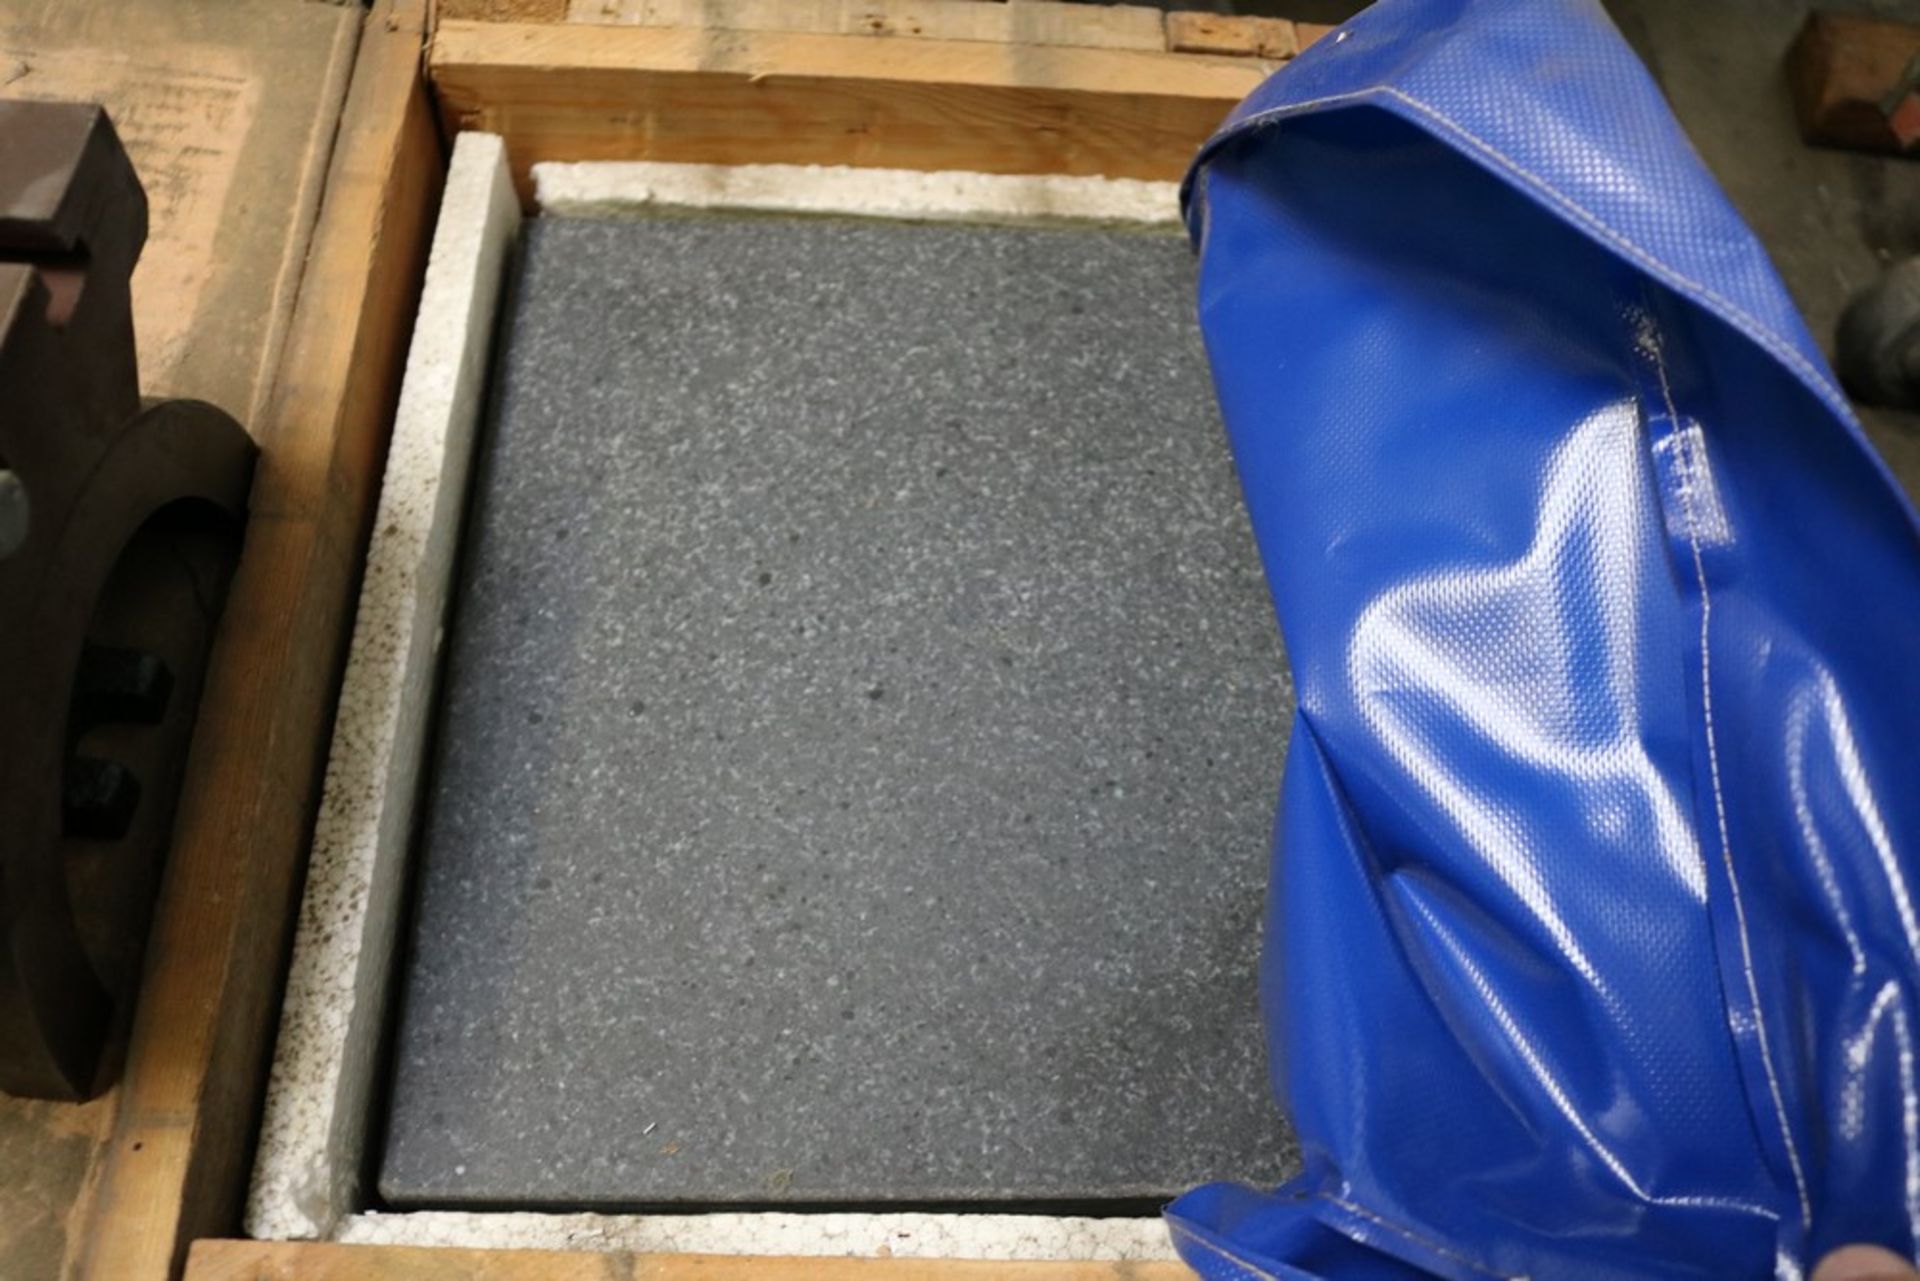 New in Box Grade A Inspection Surface Plate 12" x 9" x 3 1/2" - Image 2 of 3